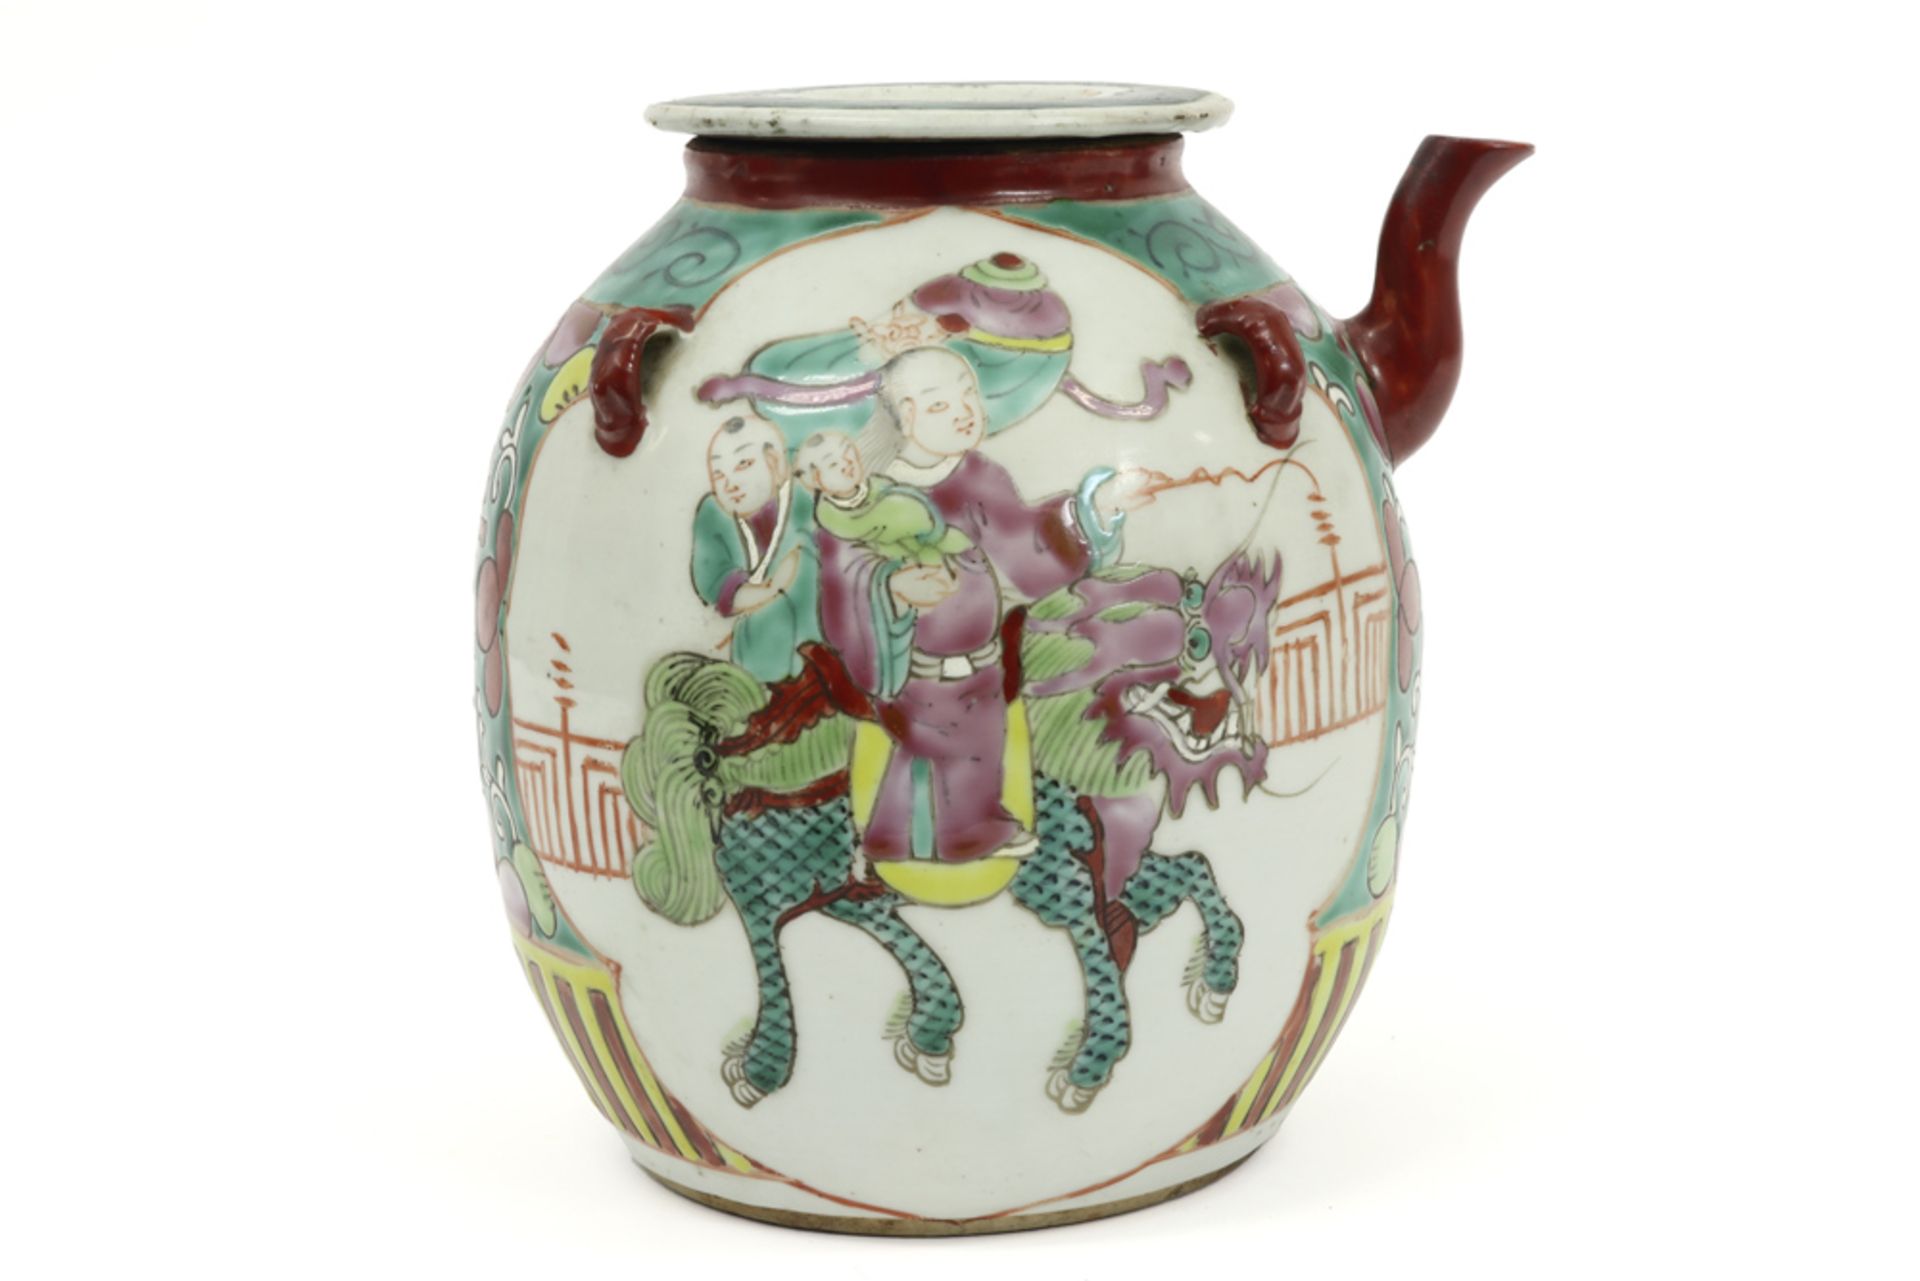 antique Chinese teapot in porcelain with a polychrome decor with figures || Antieke Chinese